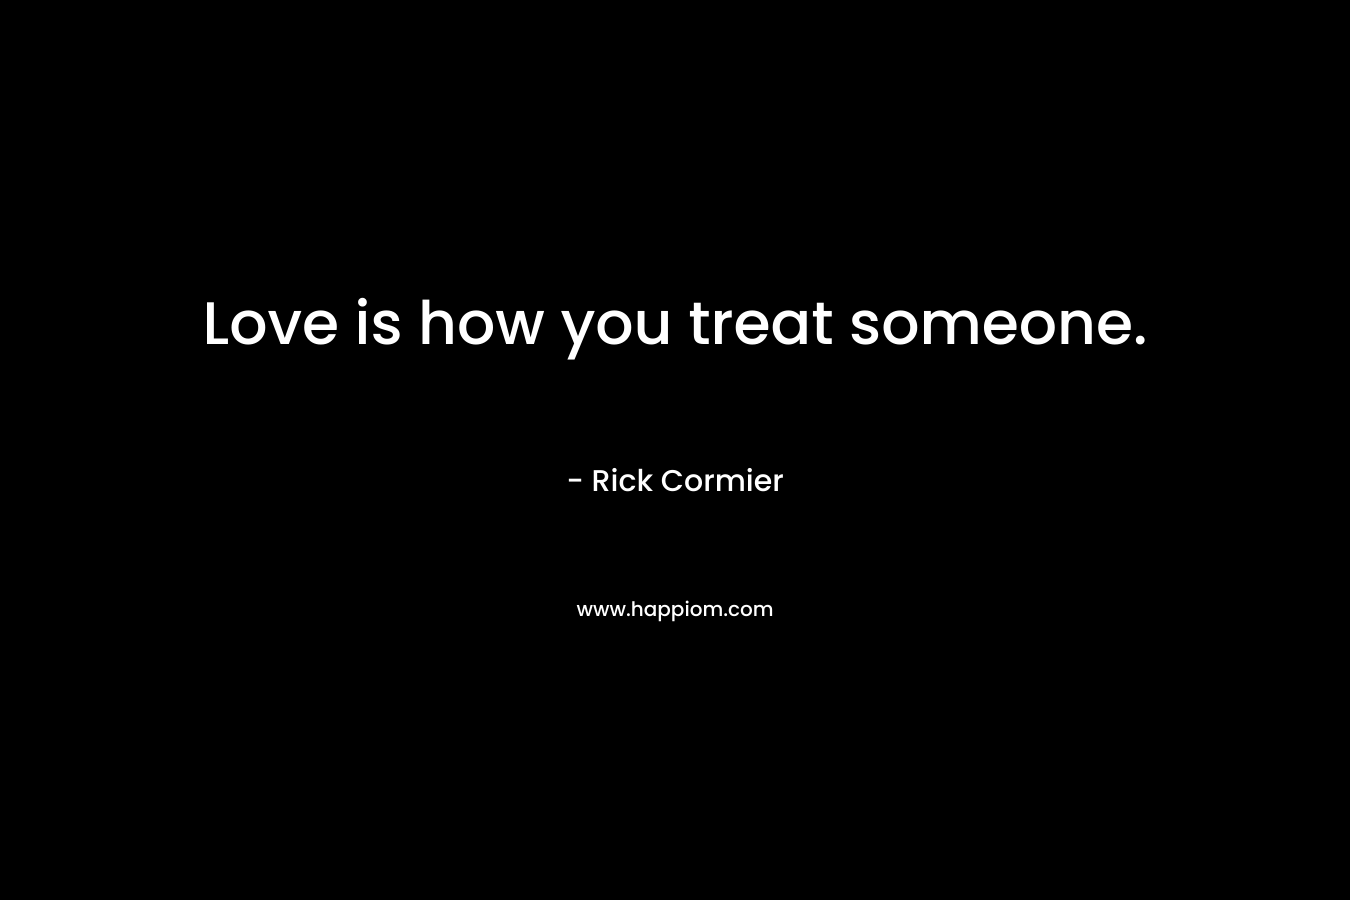 Love is how you treat someone. – Rick Cormier